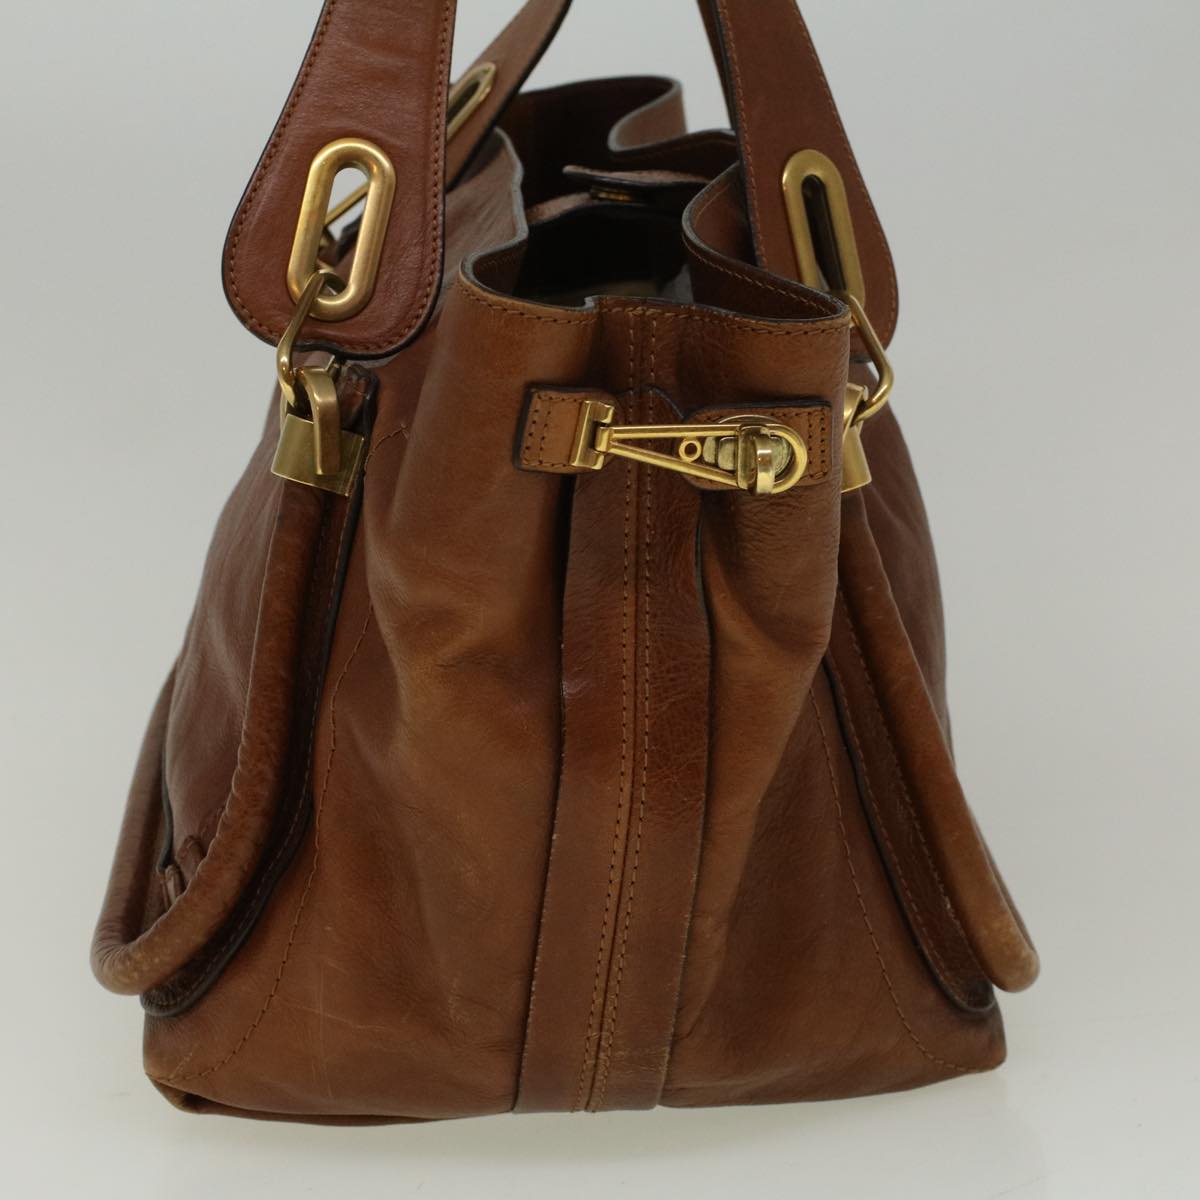 Chloe Paraty Shoulder Bag Leather Brown Auth bs9254